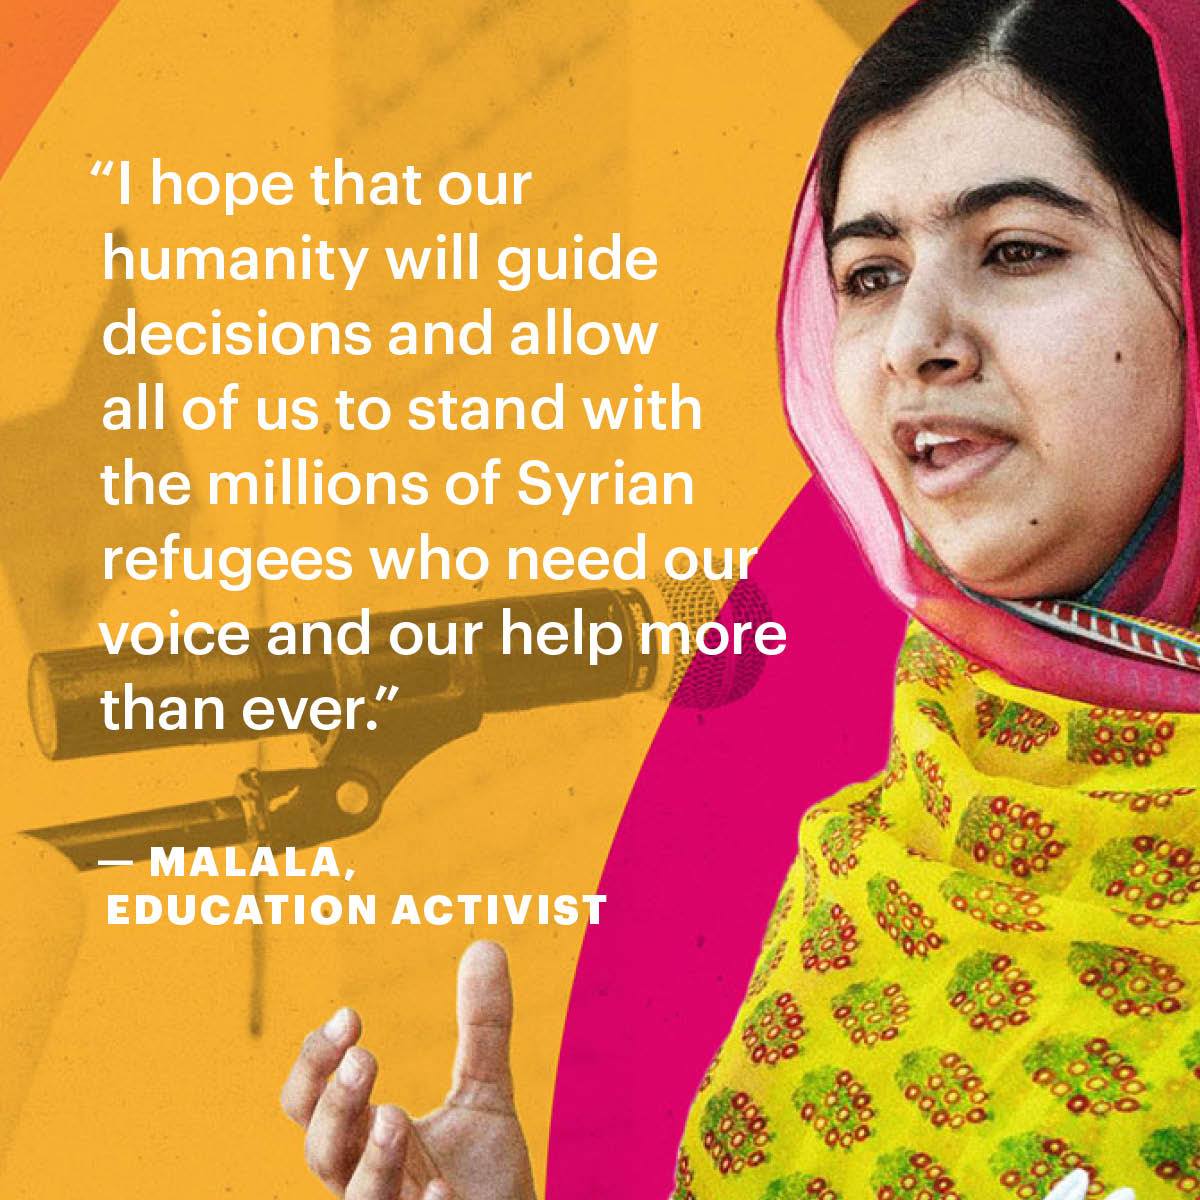 Malala Yousafzai speaks out against world's response to refugee crisis